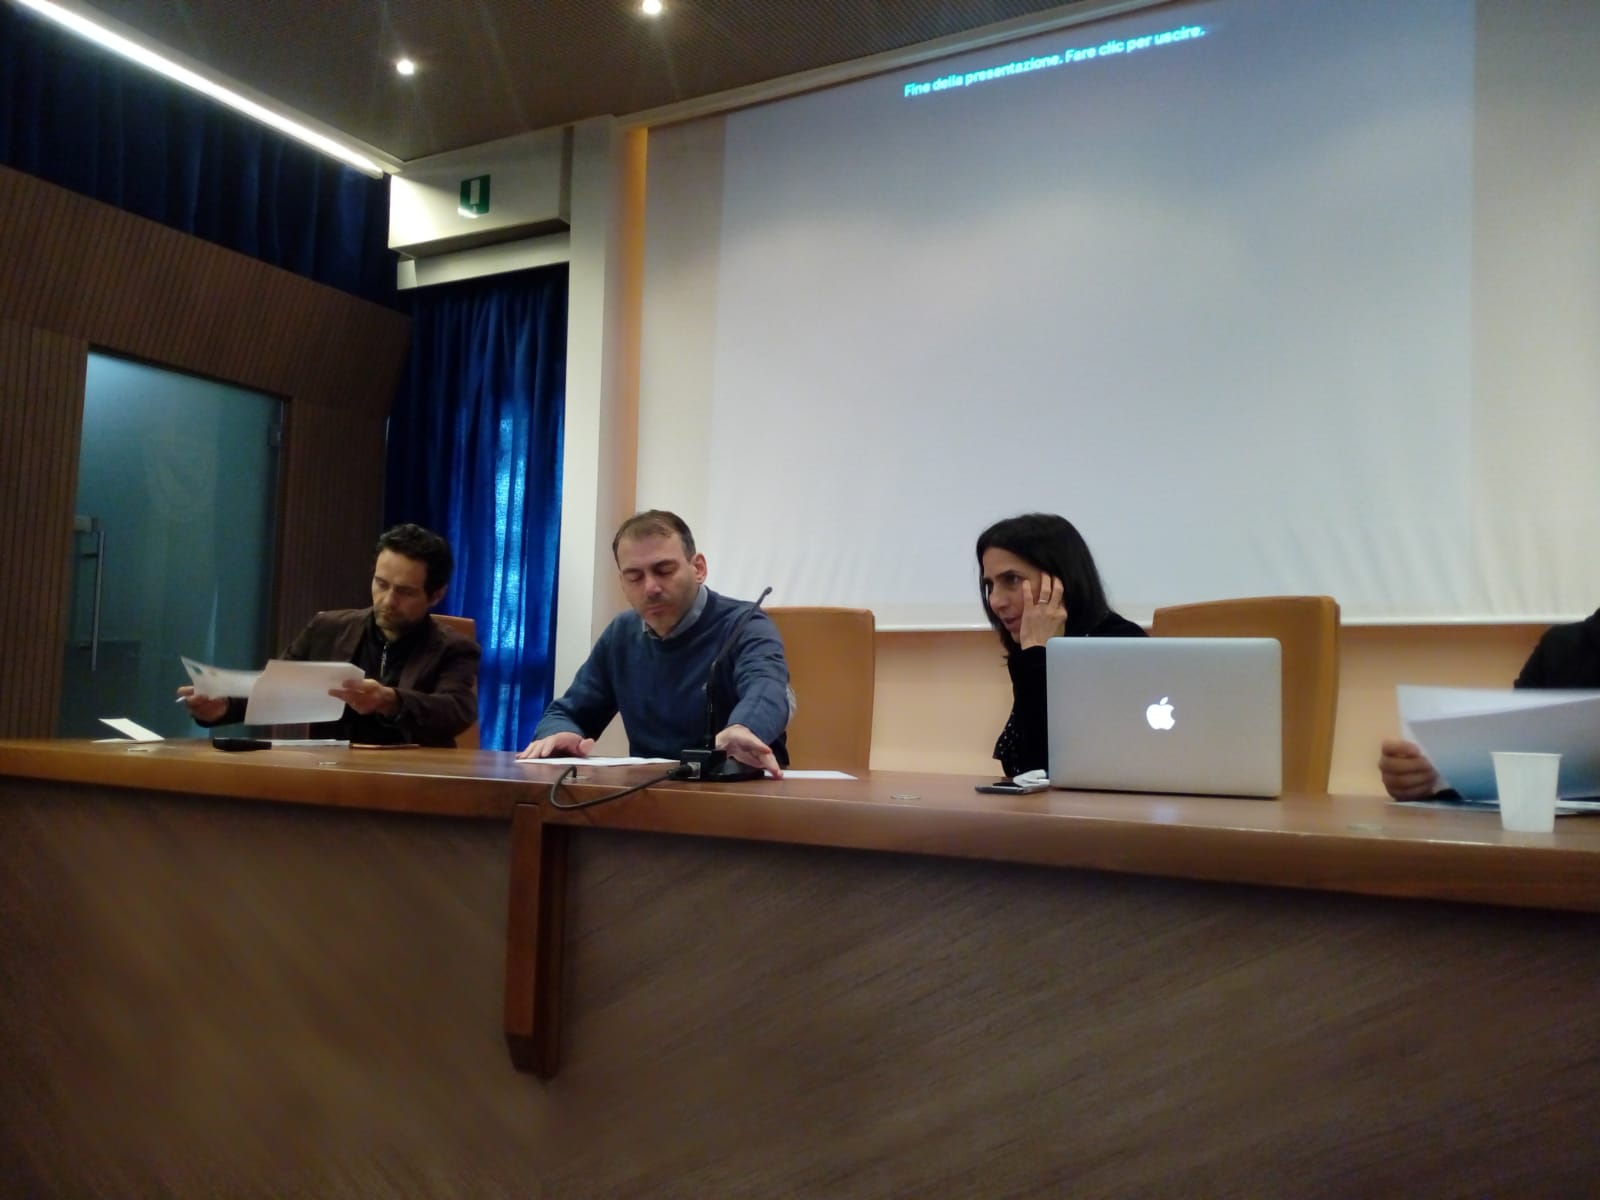 The first LSG Meeting in Campobasso